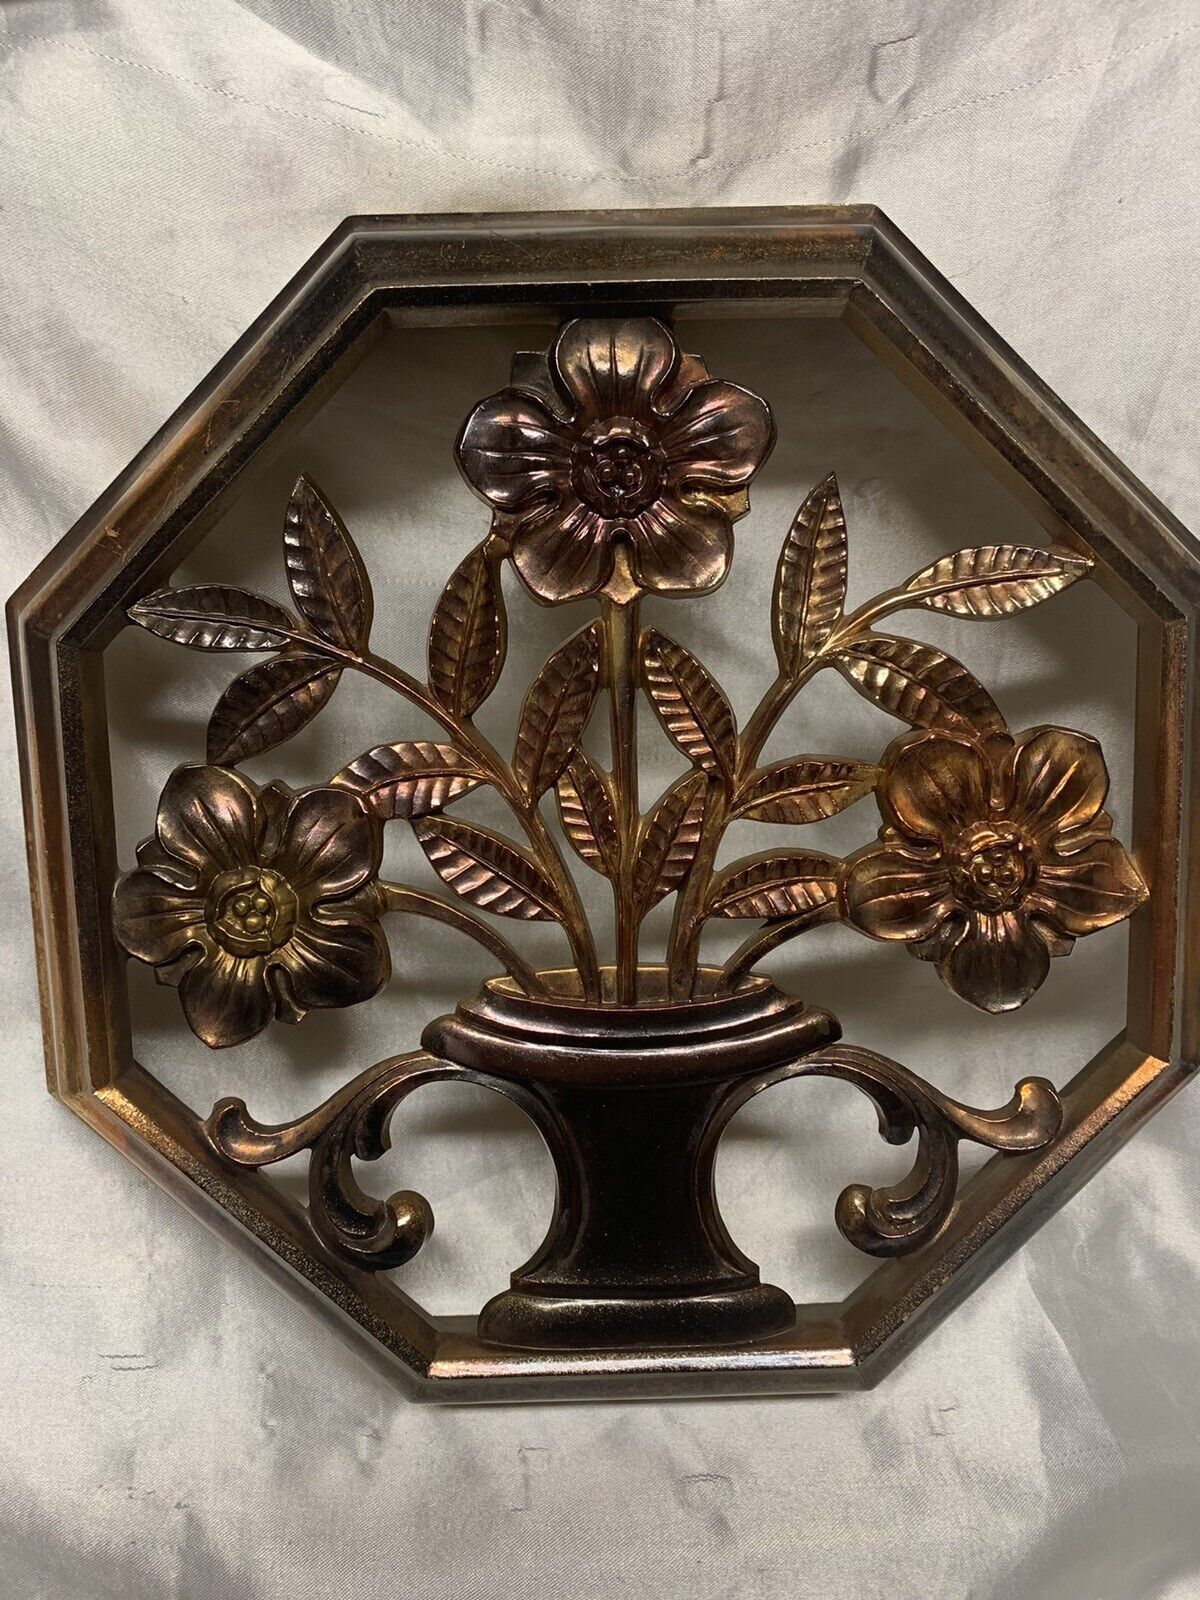 2 Vintage Syroco Bronze Flower Floral Vase Wall Plaques Mid Century Mod